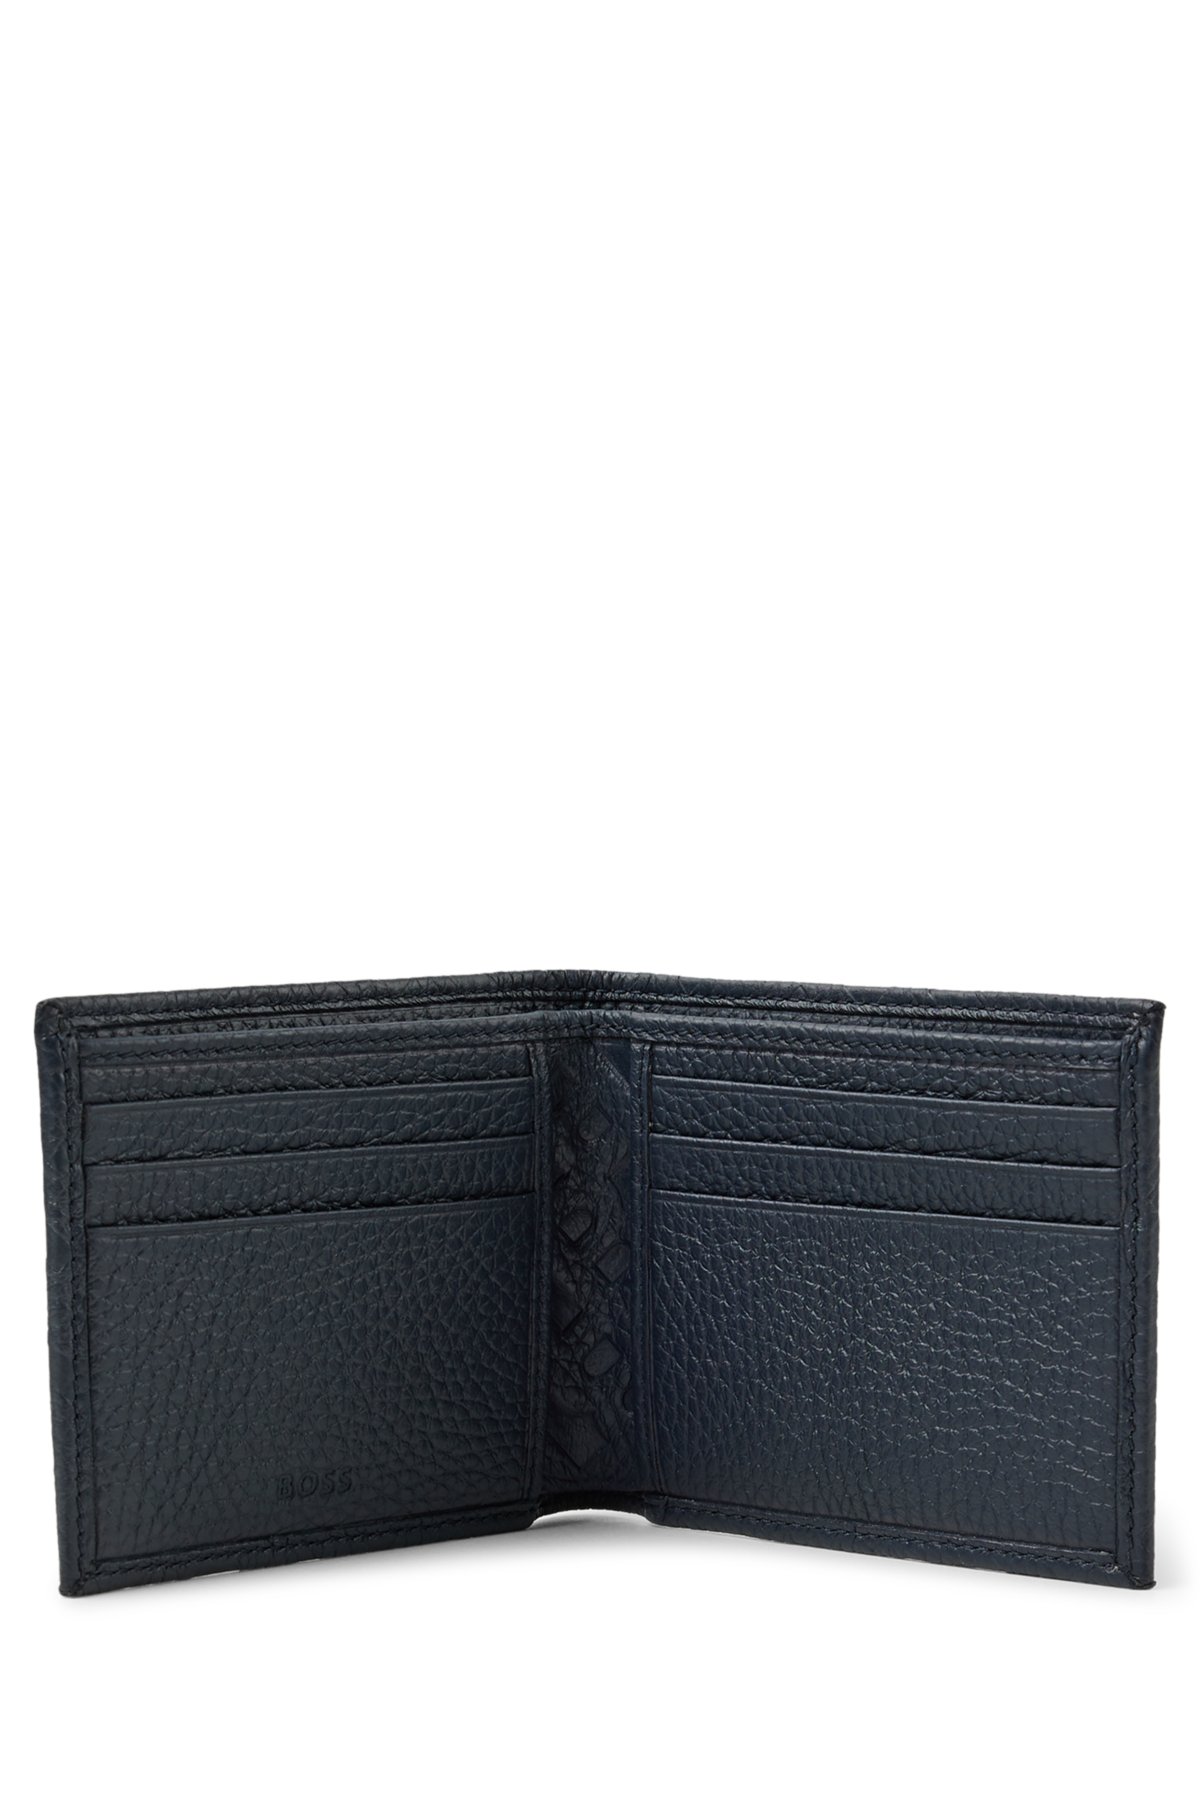 BOSS - Grained-leather envelope bag with embossed monograms